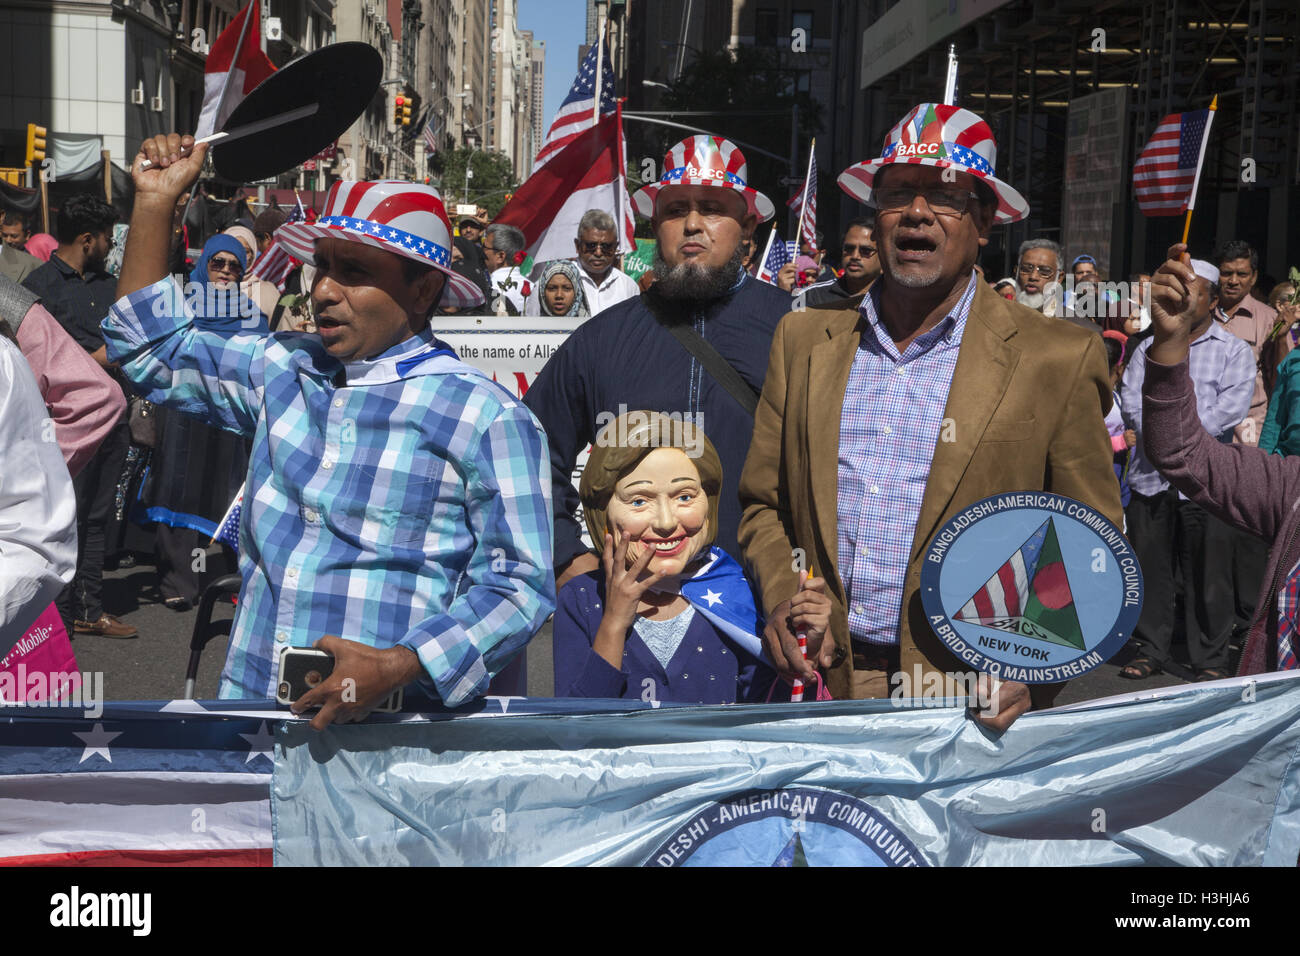 United American Muslim Day Parade on Madison Avenue in New York City. Bangladeshi Americans march in the parade expressing their love and patriotism towards America. Stock Photo